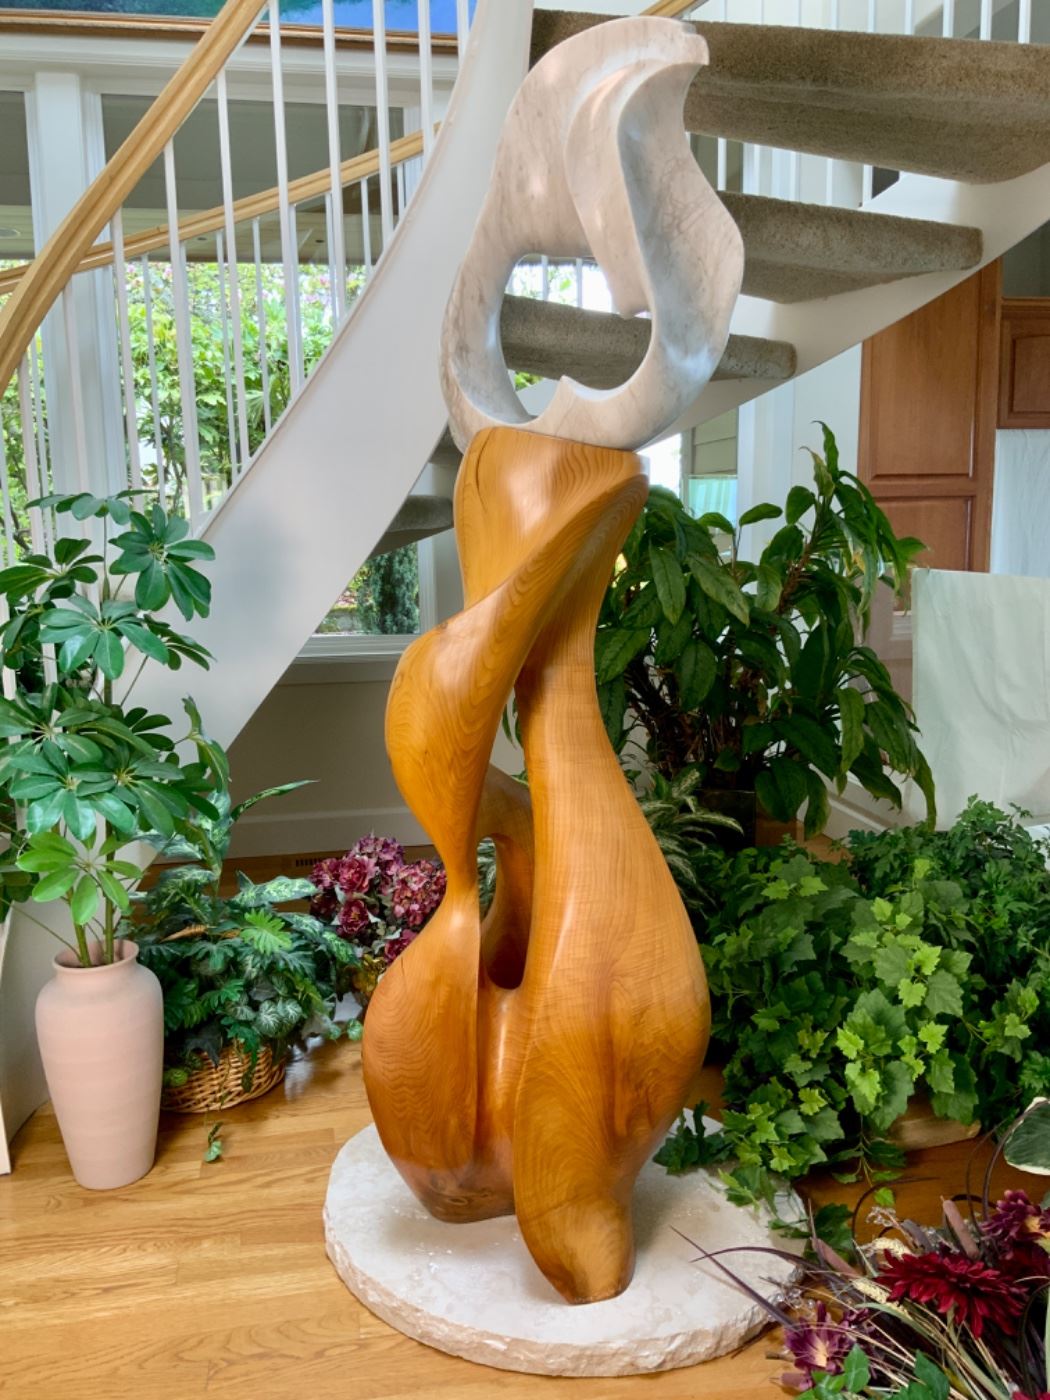 Fine art sculpture by artist/sculptor Bruce Turnbull.  Original art consists of wood and marble.  67” tall.